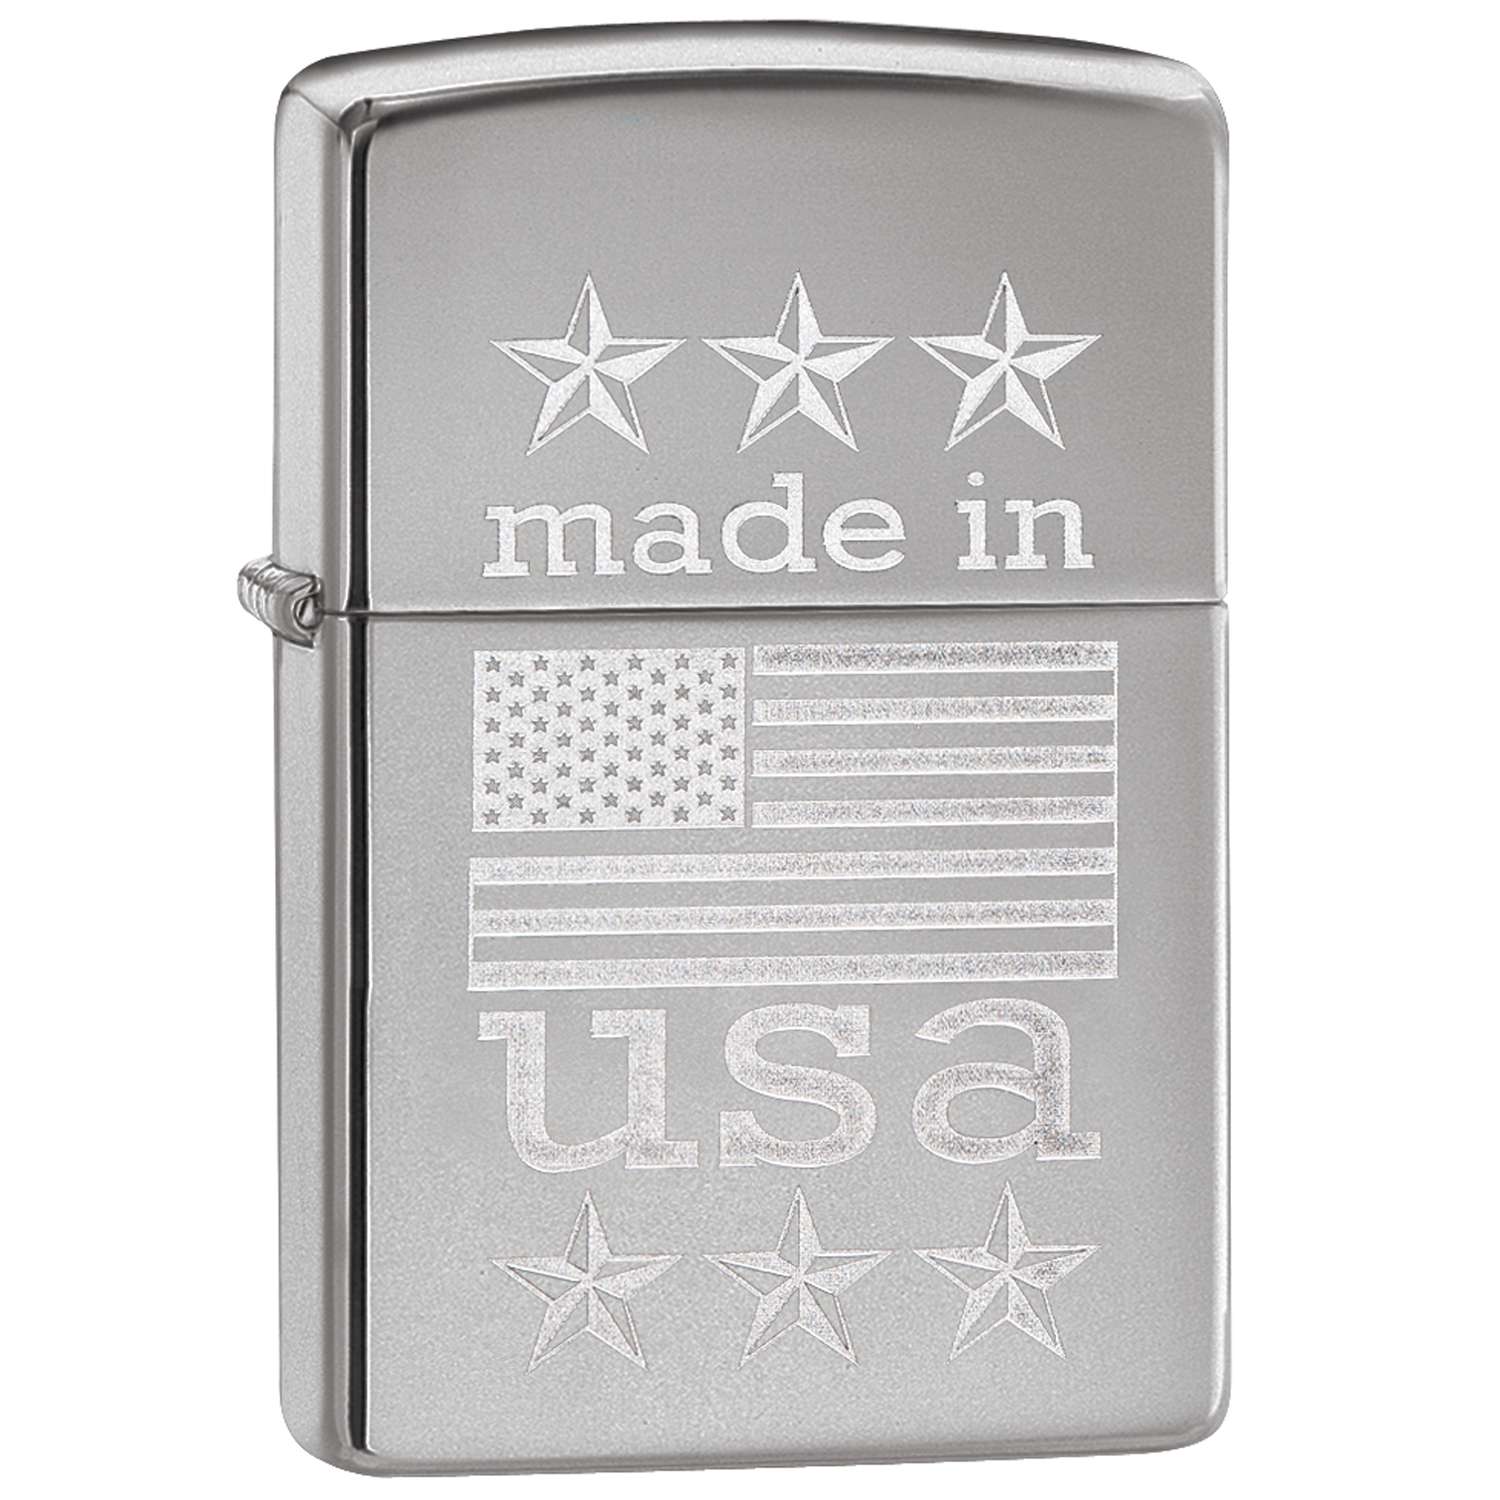 Check Out My Zippo Lighter Collection! Seeking Opinions and Valuations : r/ Zippo